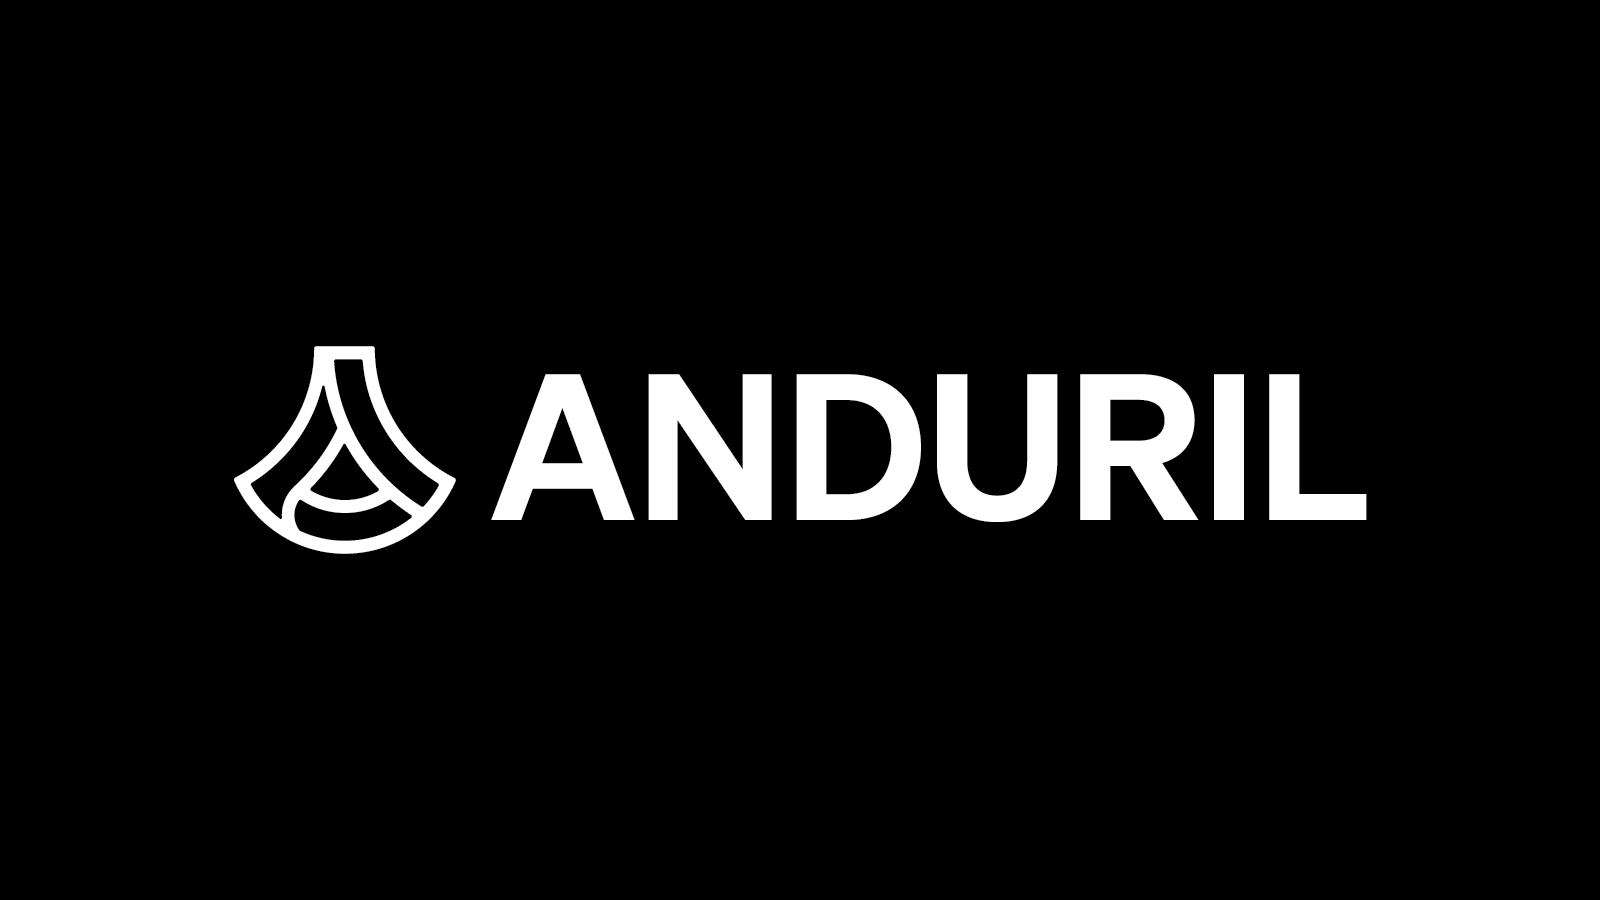 US Army, DIU select Anduril to develop software architecture for Robotic Combat Vehicle Program